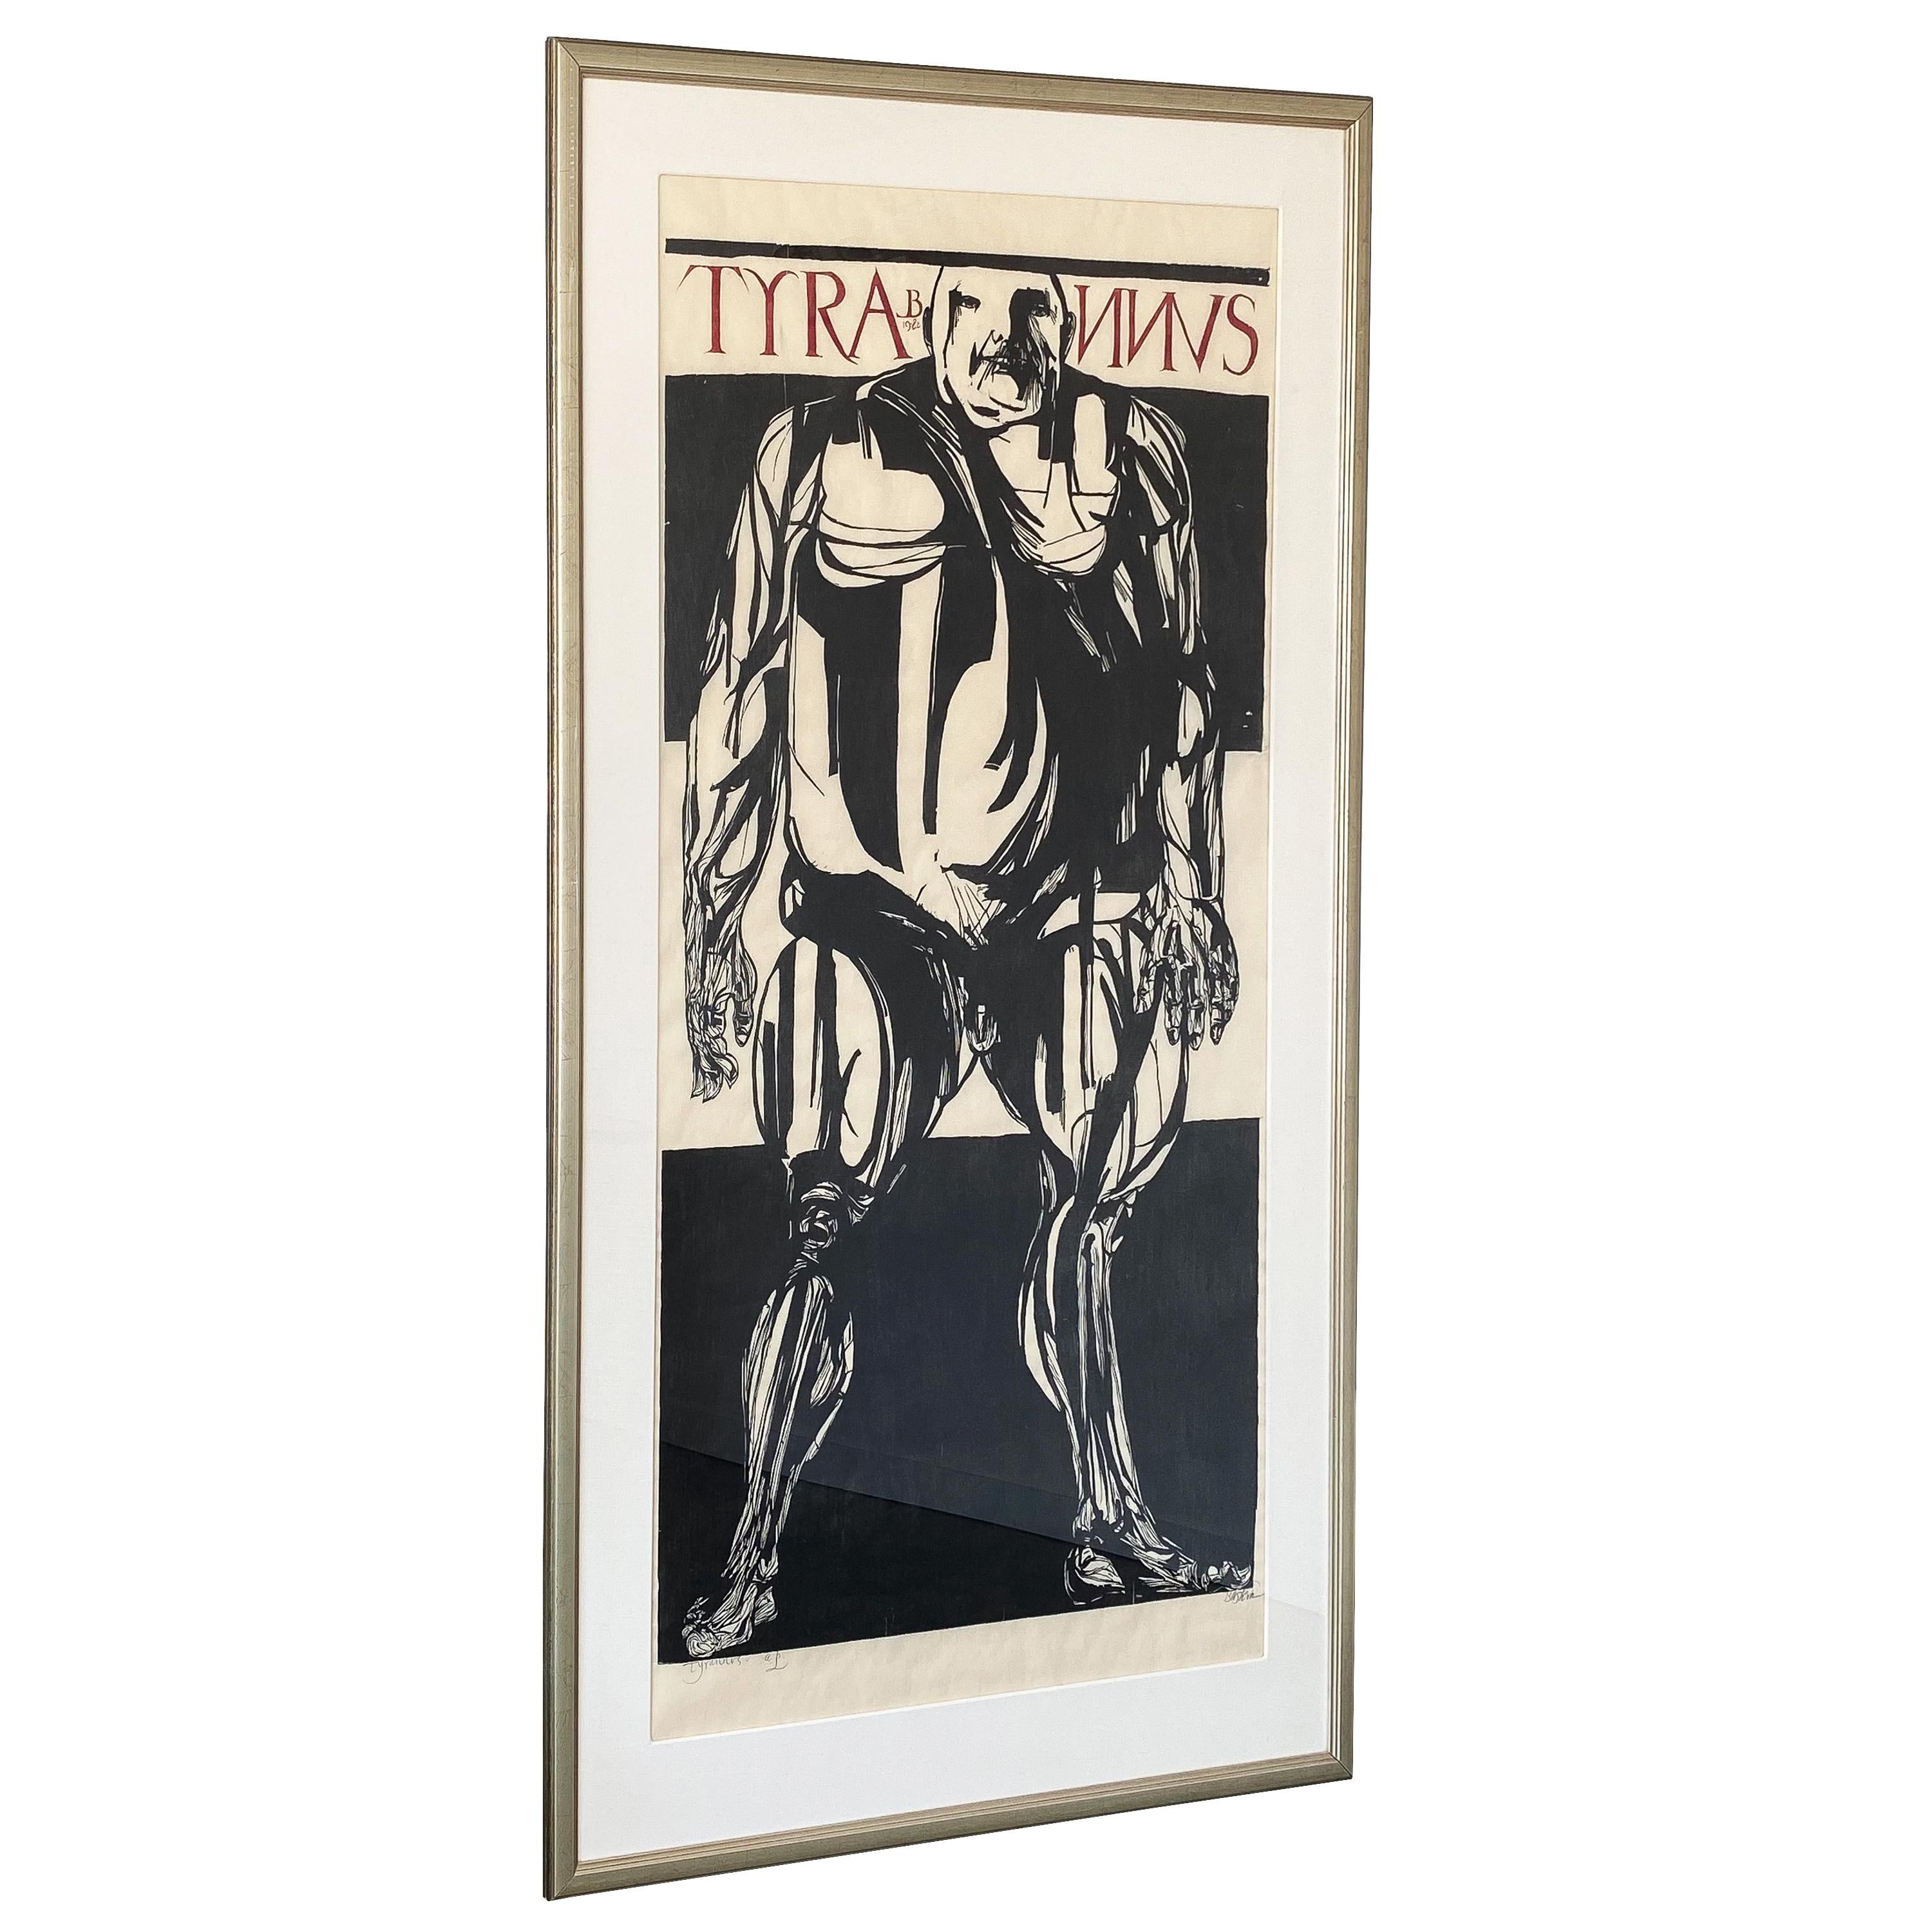 A monumental framed woodcut print by Leonard Baskin (American, 1922-2000) titled Tyrannus, 1982. Tyrannus features an abstract male nude comprised of an intricate network of sinewy anatomical lines in black with the title and date in red. Signed,